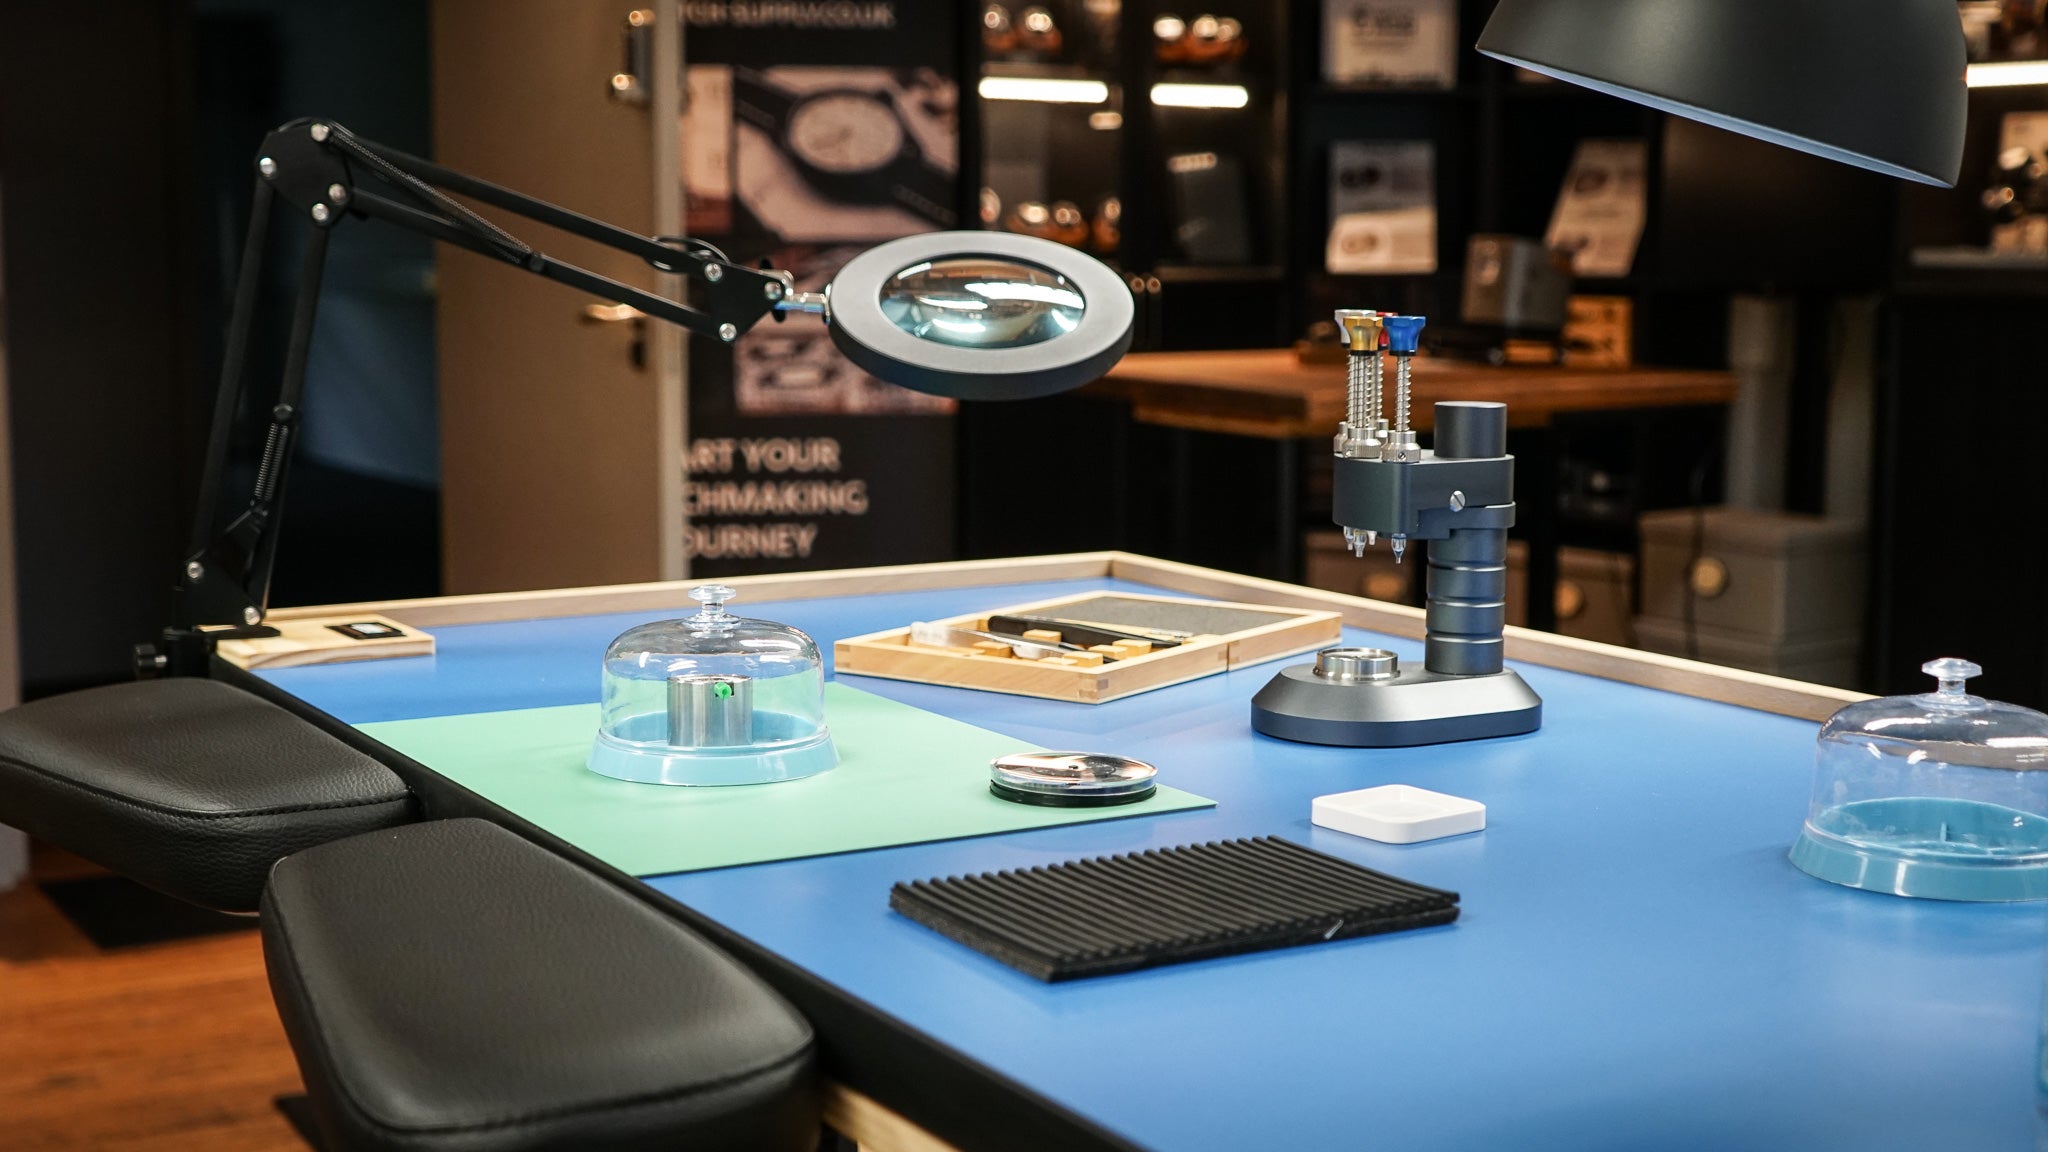 Watchmaking experience (London)